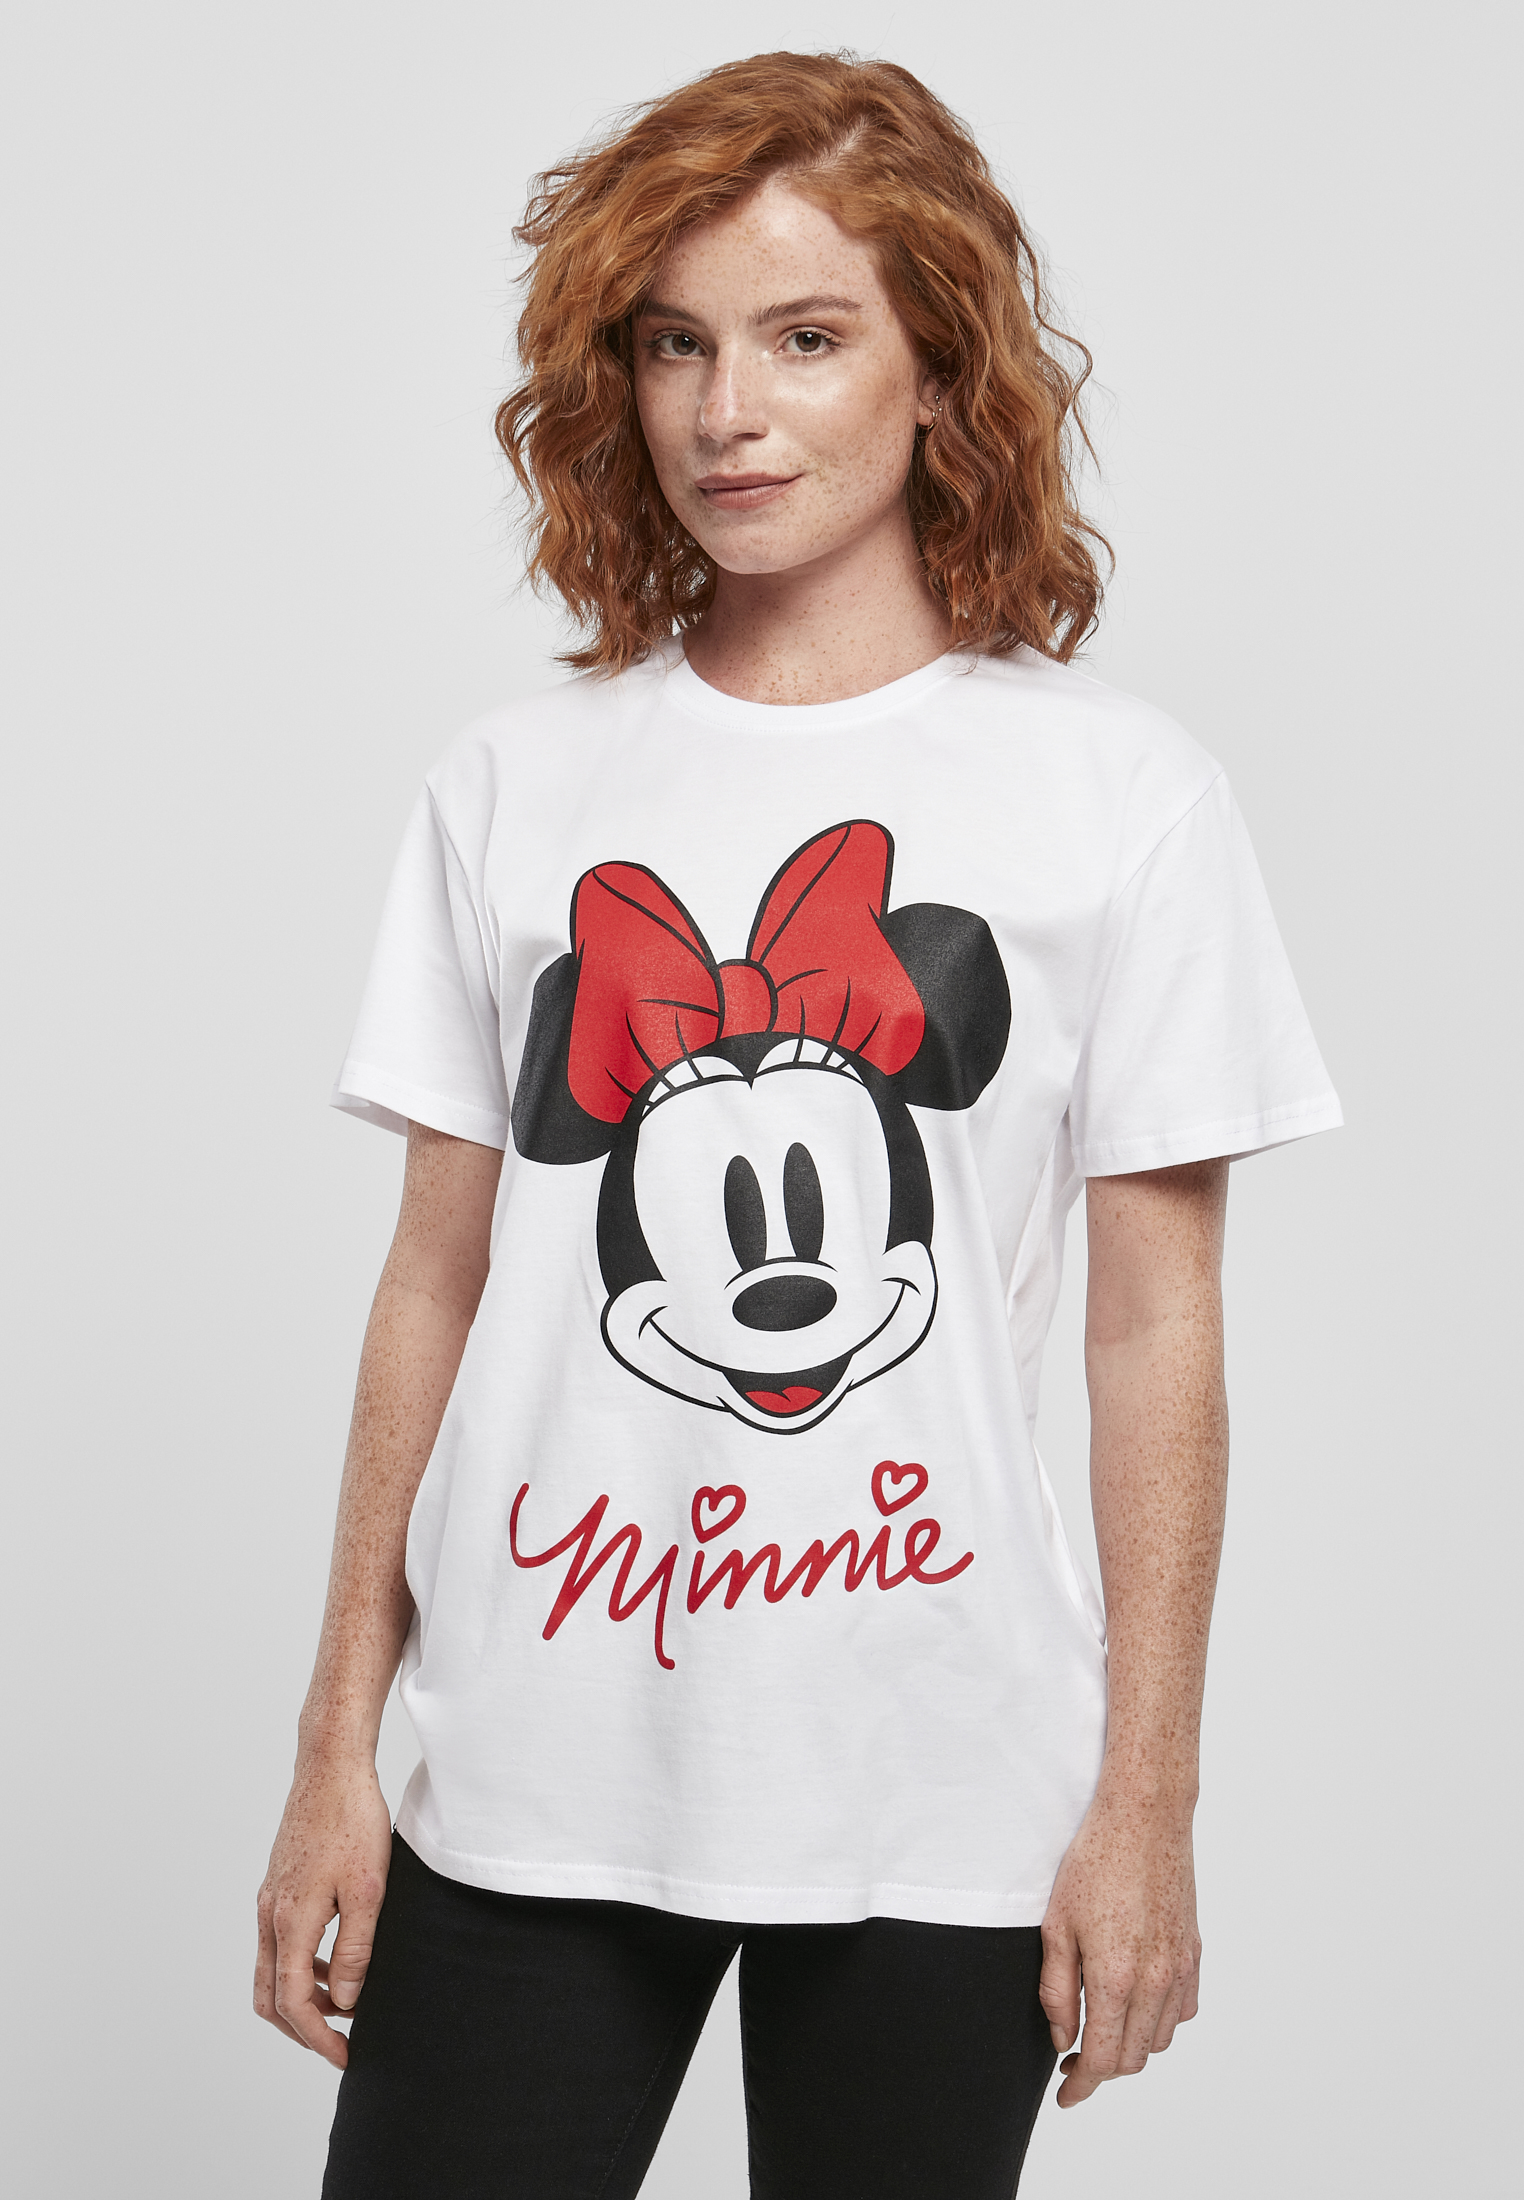 Chanel Minnie Mouse No 5 Shirt - Vintagenclassic Tee